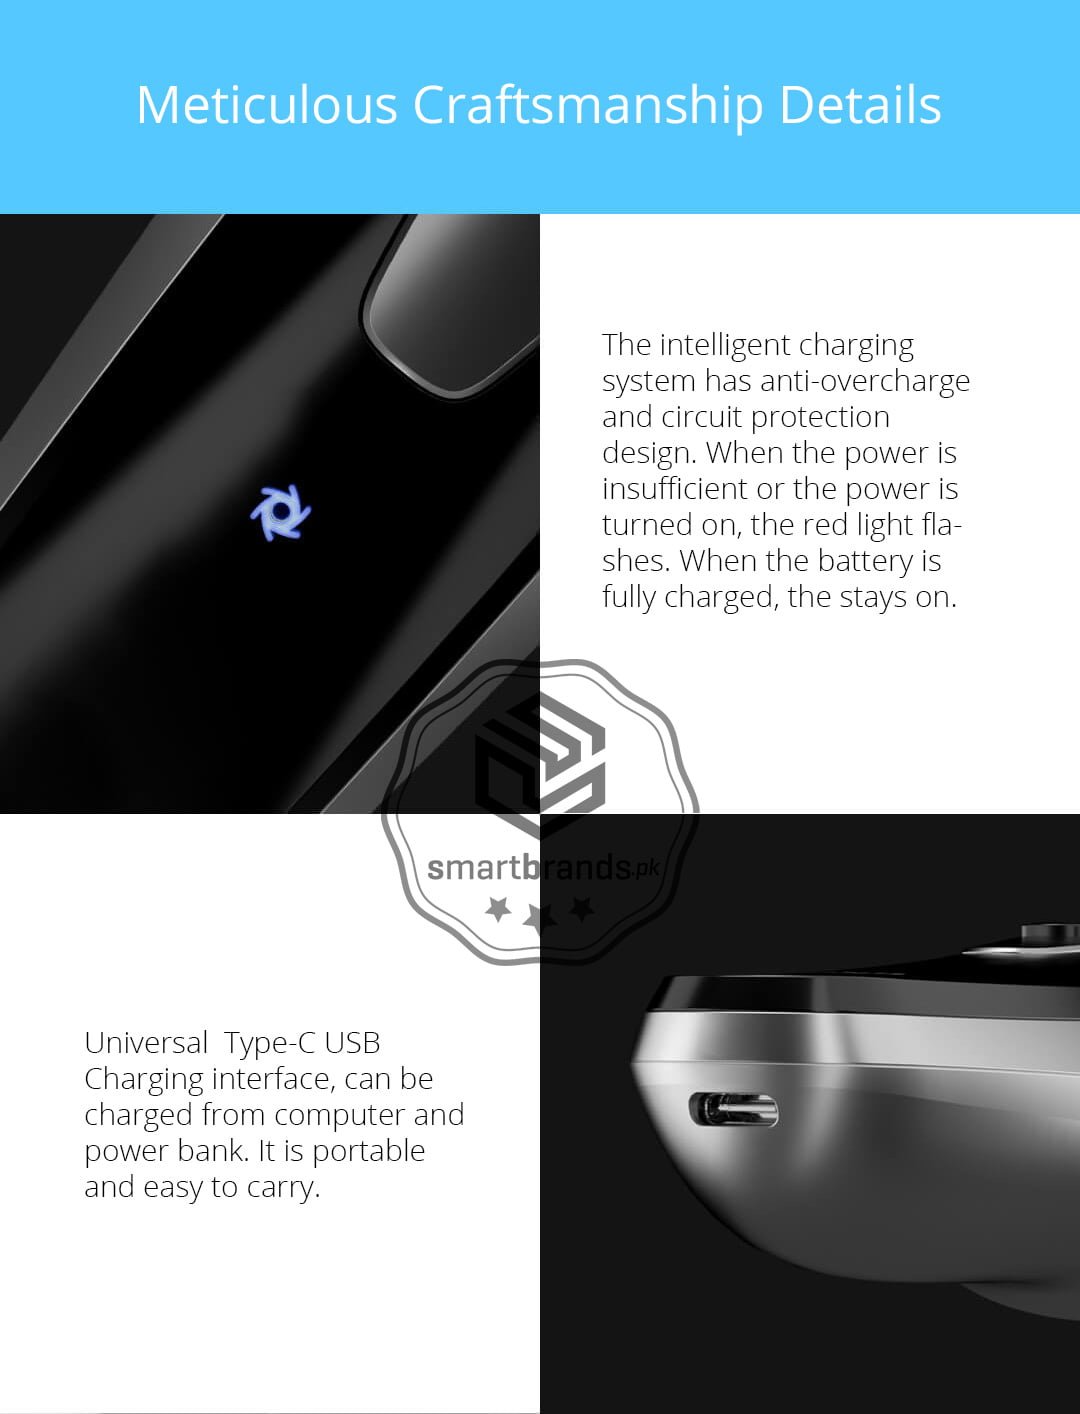 The intelligent charging system has anti-overcharge and circuit protection design. When the power is insufficient or the power is turned on, the red light flashes. When the battery is fully charged, the stays on.